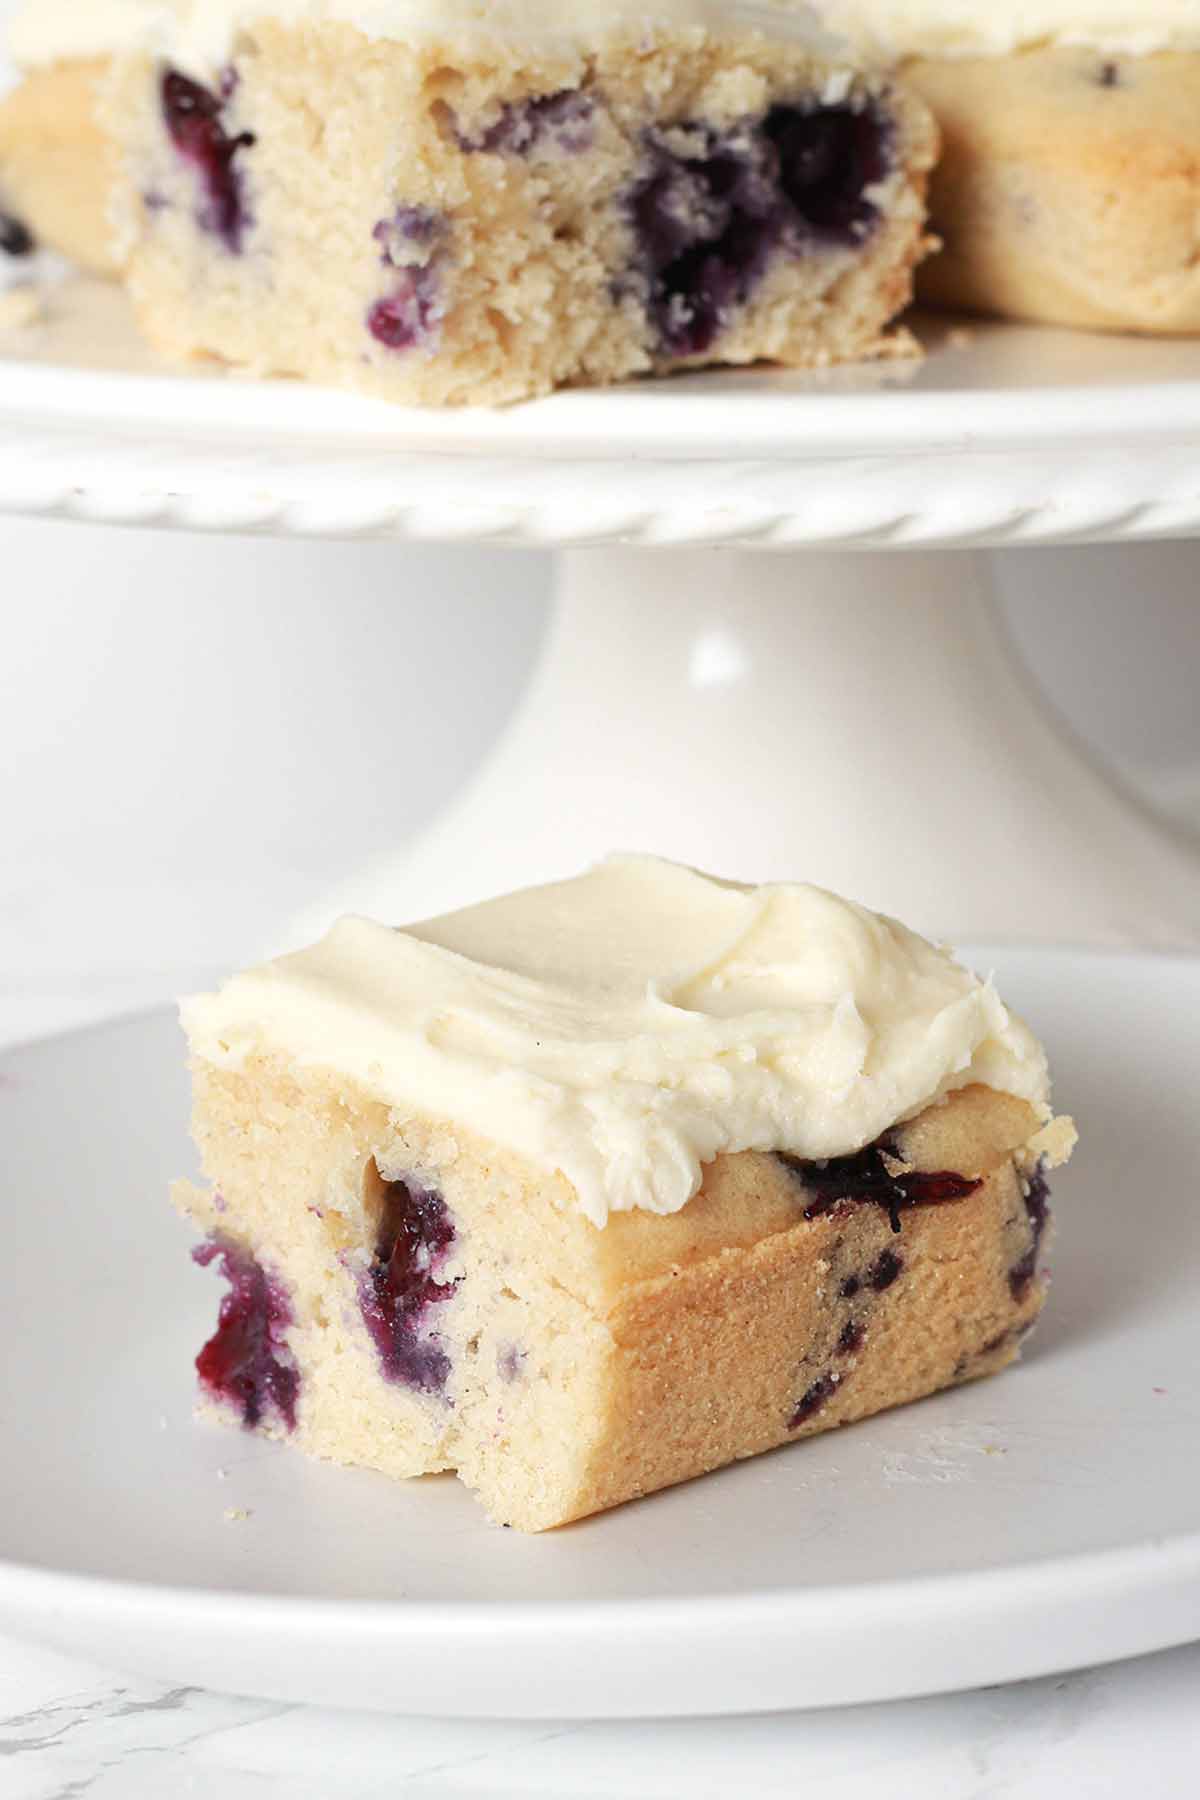 Slices Of Blueberry Cake On A Cake Stand Behind A Slice On A Plate